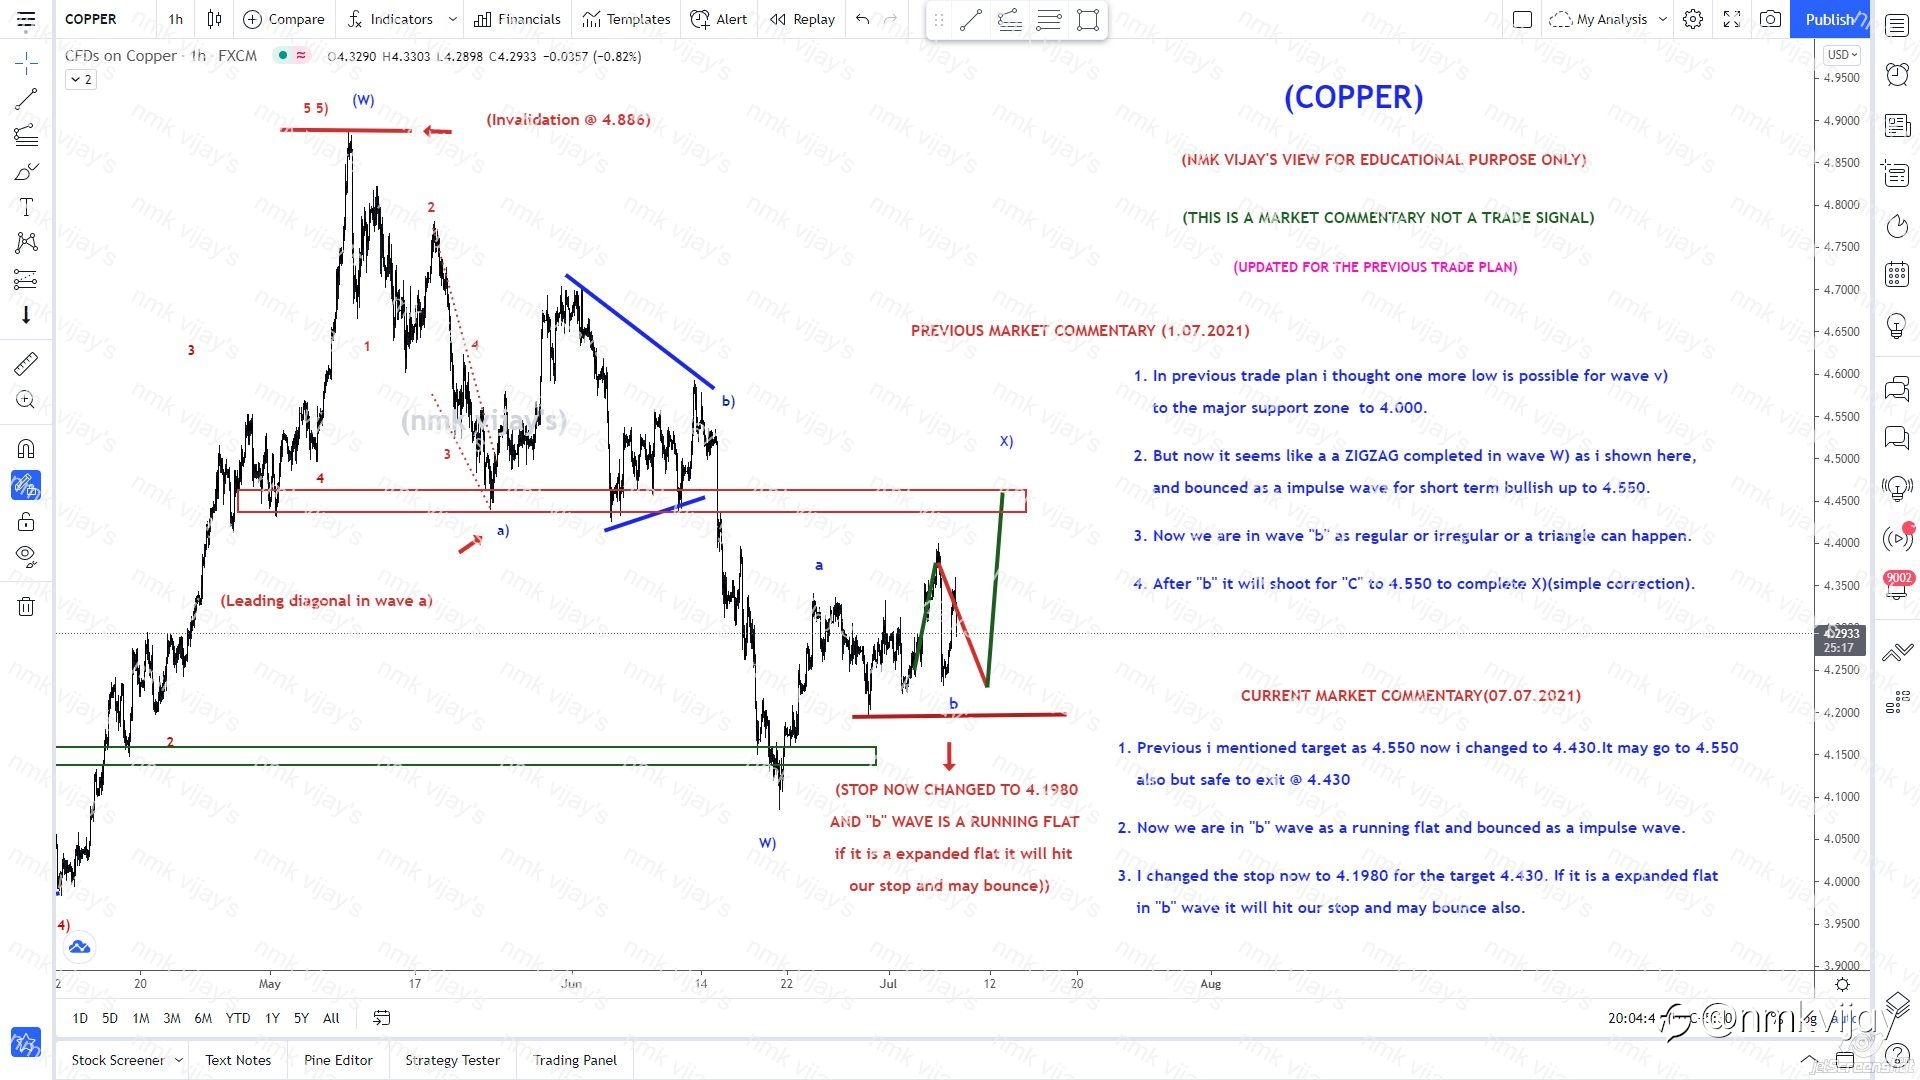 COPPER-Running flat in wave b ? C to 4.430 ?